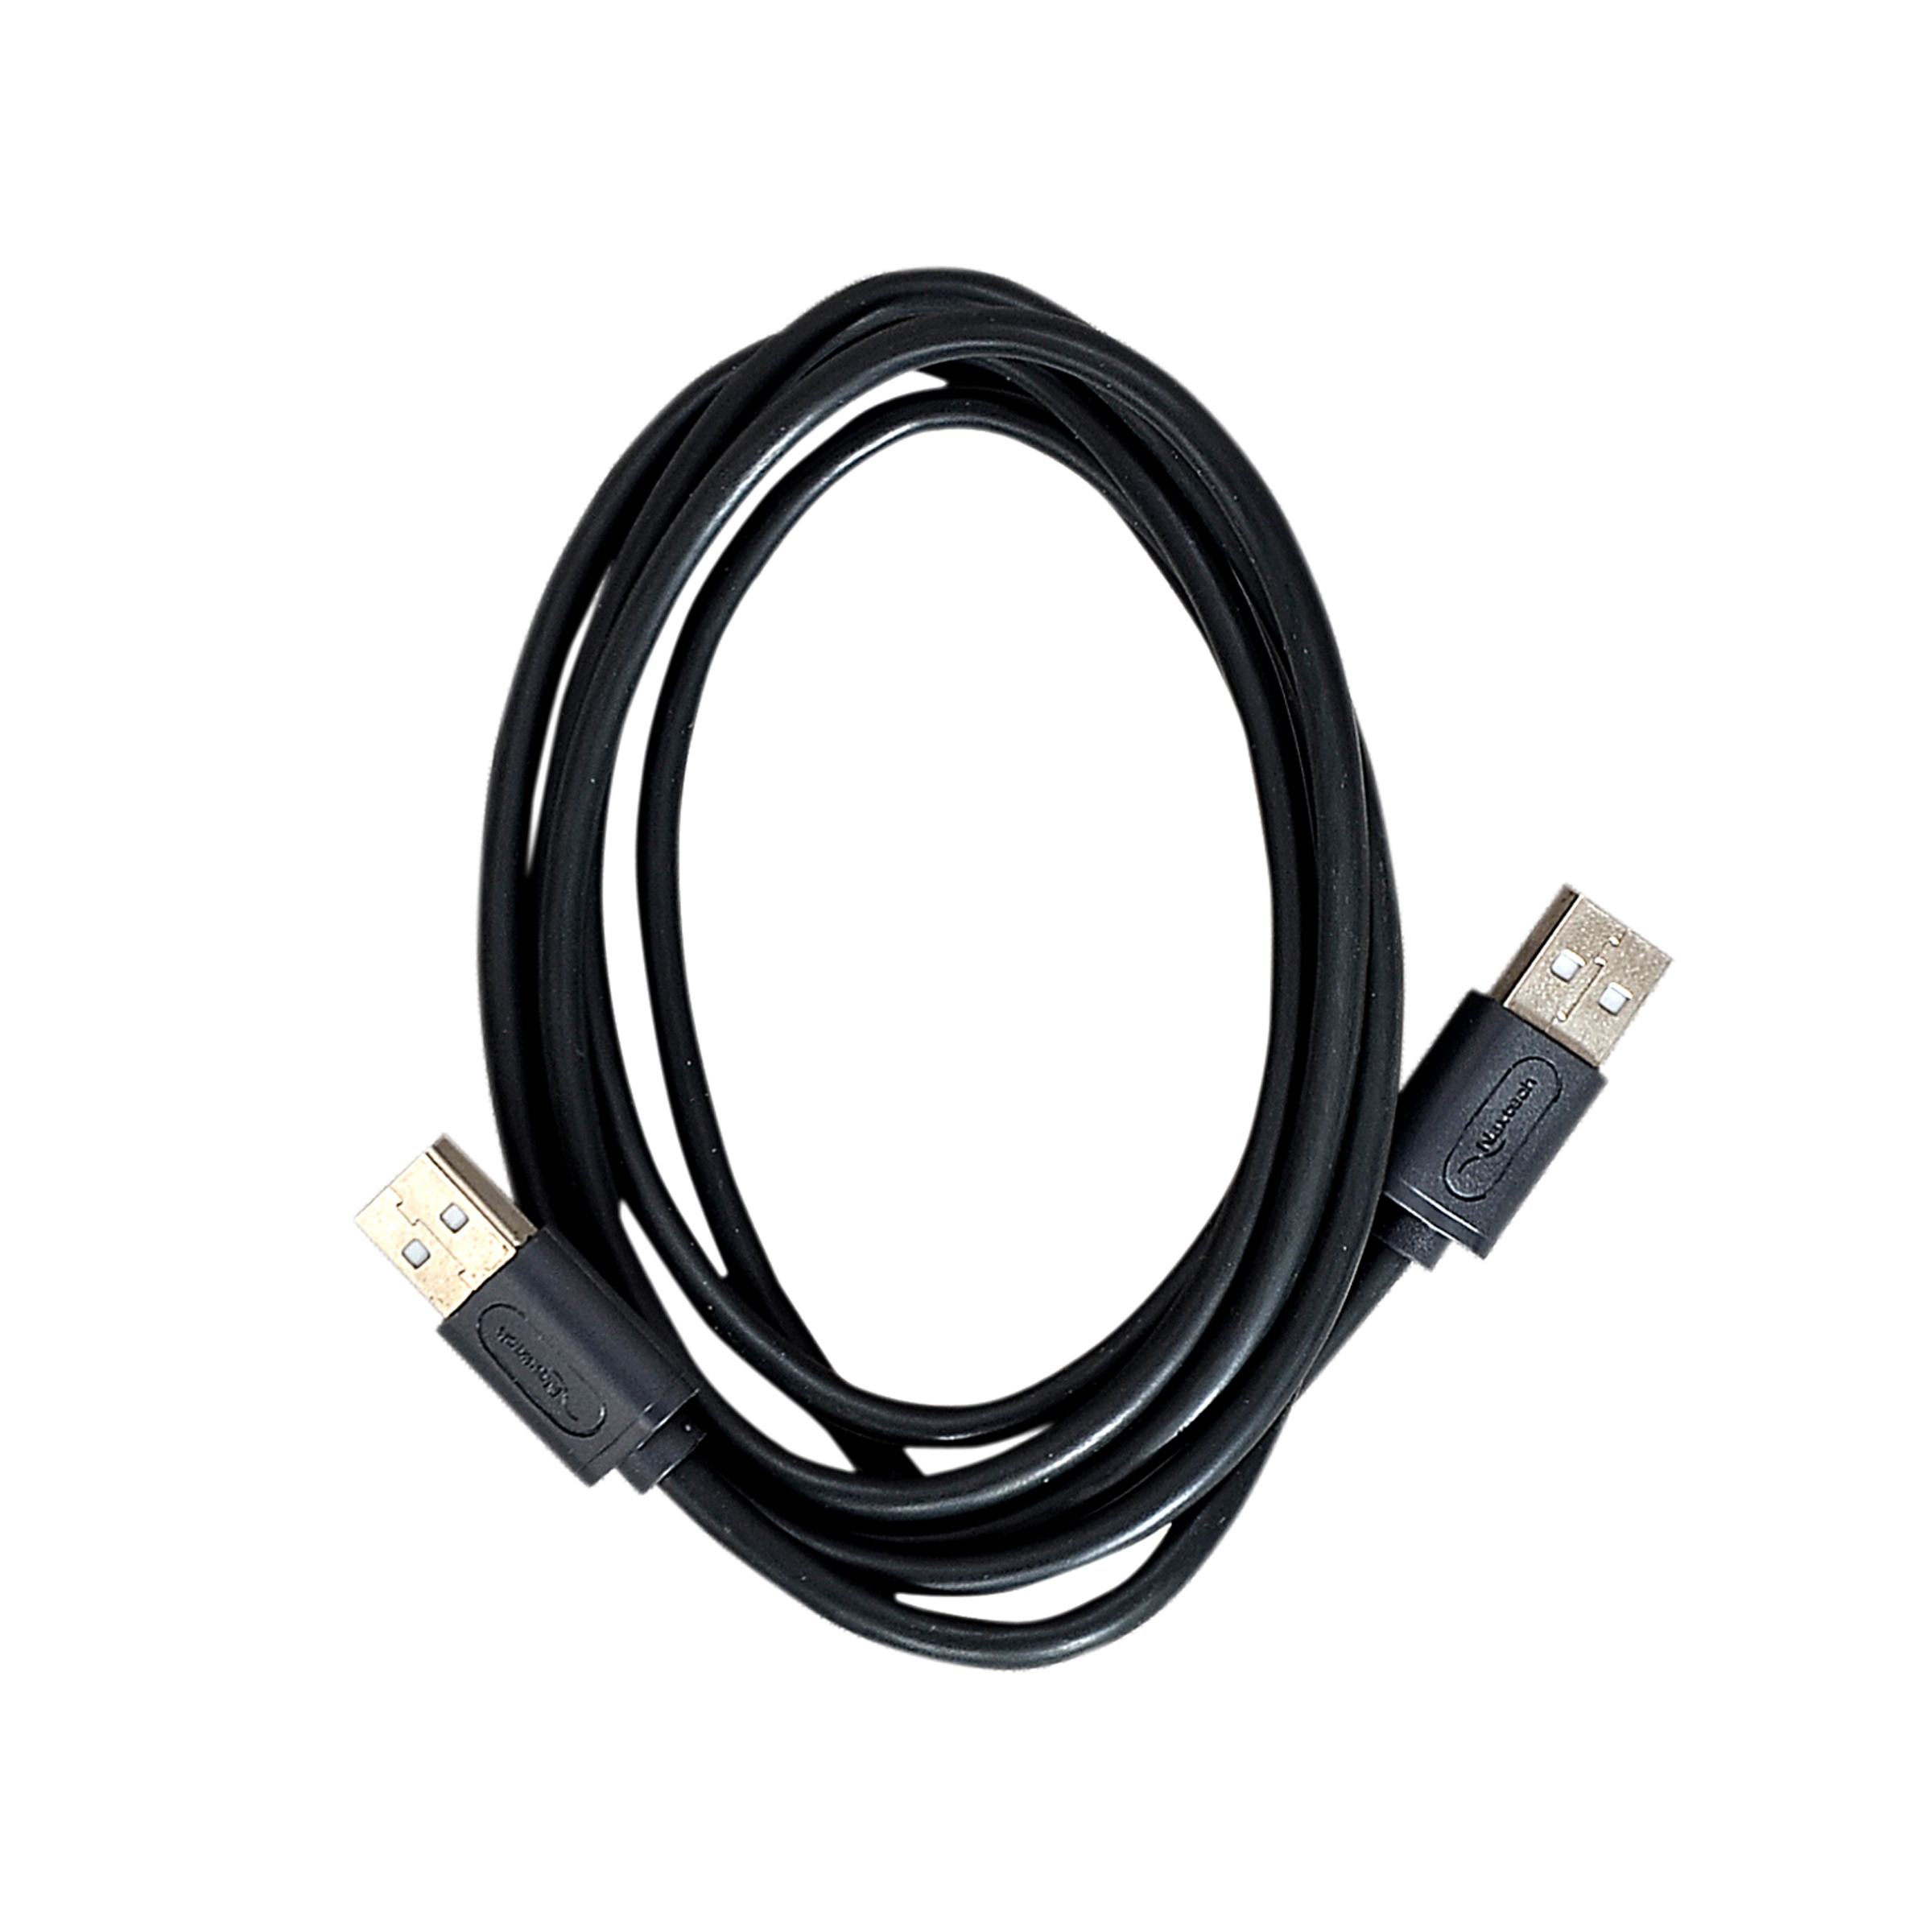 Nextech NC32 USB 2.0 (M) TO USB (M) SHIELDED CABLE 1.5 m